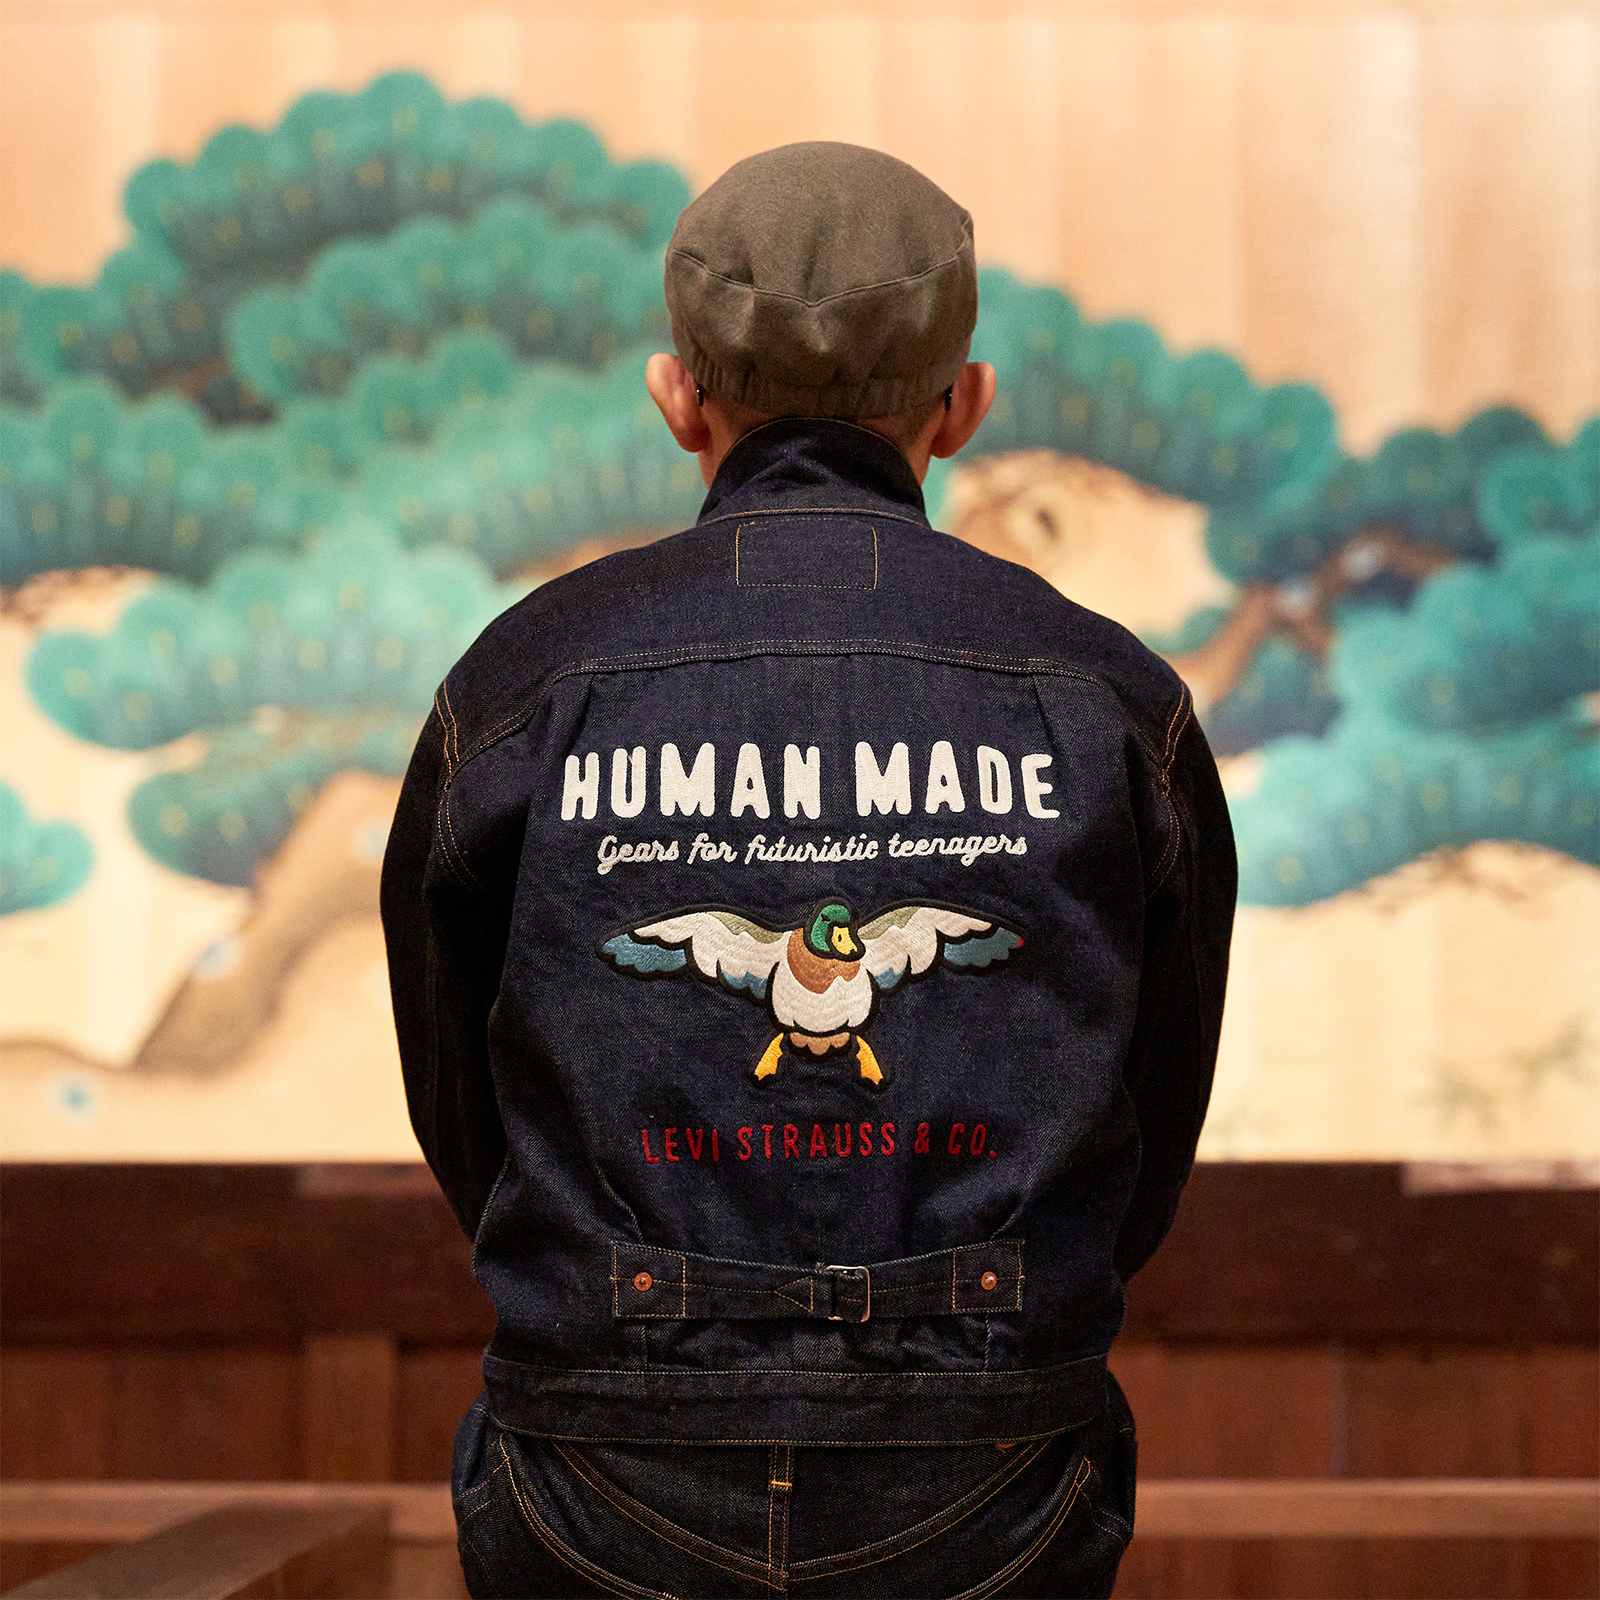 LEVI'S®︎ x HUMAN MADE Collection for Spring 2022 | HUMAN MADE Inc.